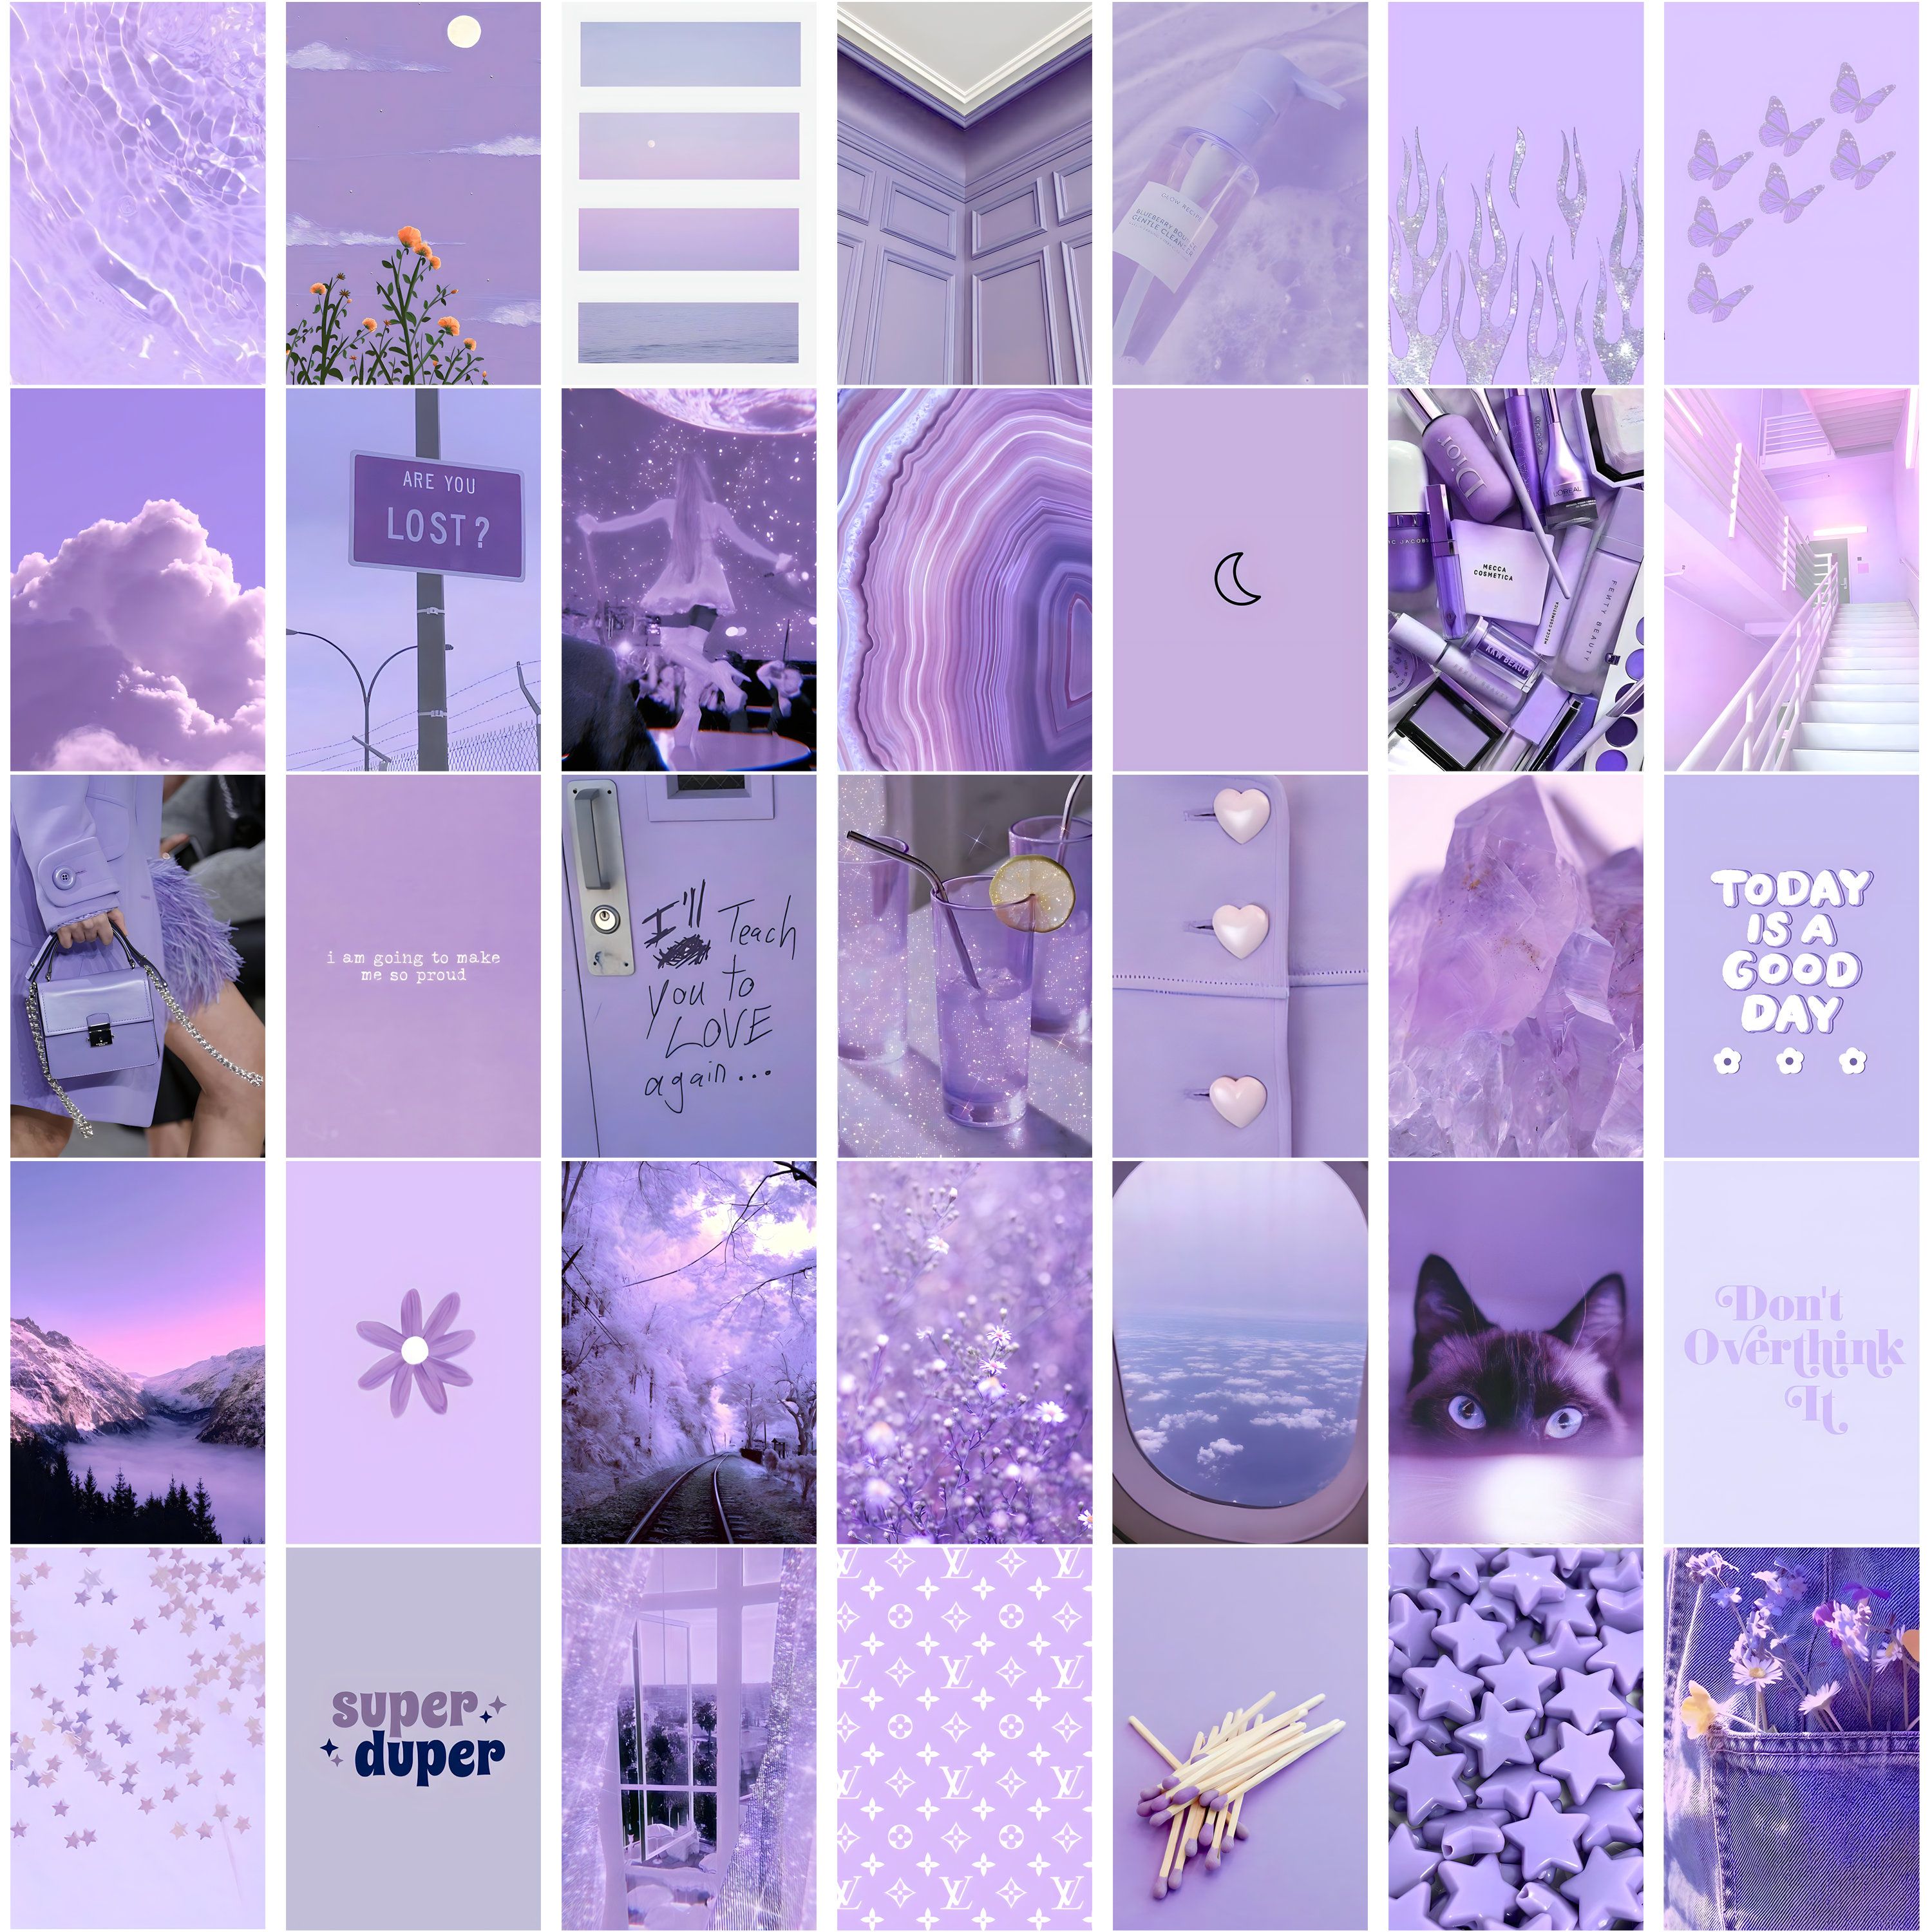 A purple aesthetic collage kit for wall art, 30 photos, purple wall decor, purple room decor, purple aesthetic wall art, purple wall decor, purple room decor, purple aesthetic wall art, purple aesthetic wall decor, purple aesthetic collage kit, purple aesthetic wall decor kit, purple aesthetic wall art kit, purple aesthetic wall decor kit, purple aesthetic collage kit for wall art - Lavender